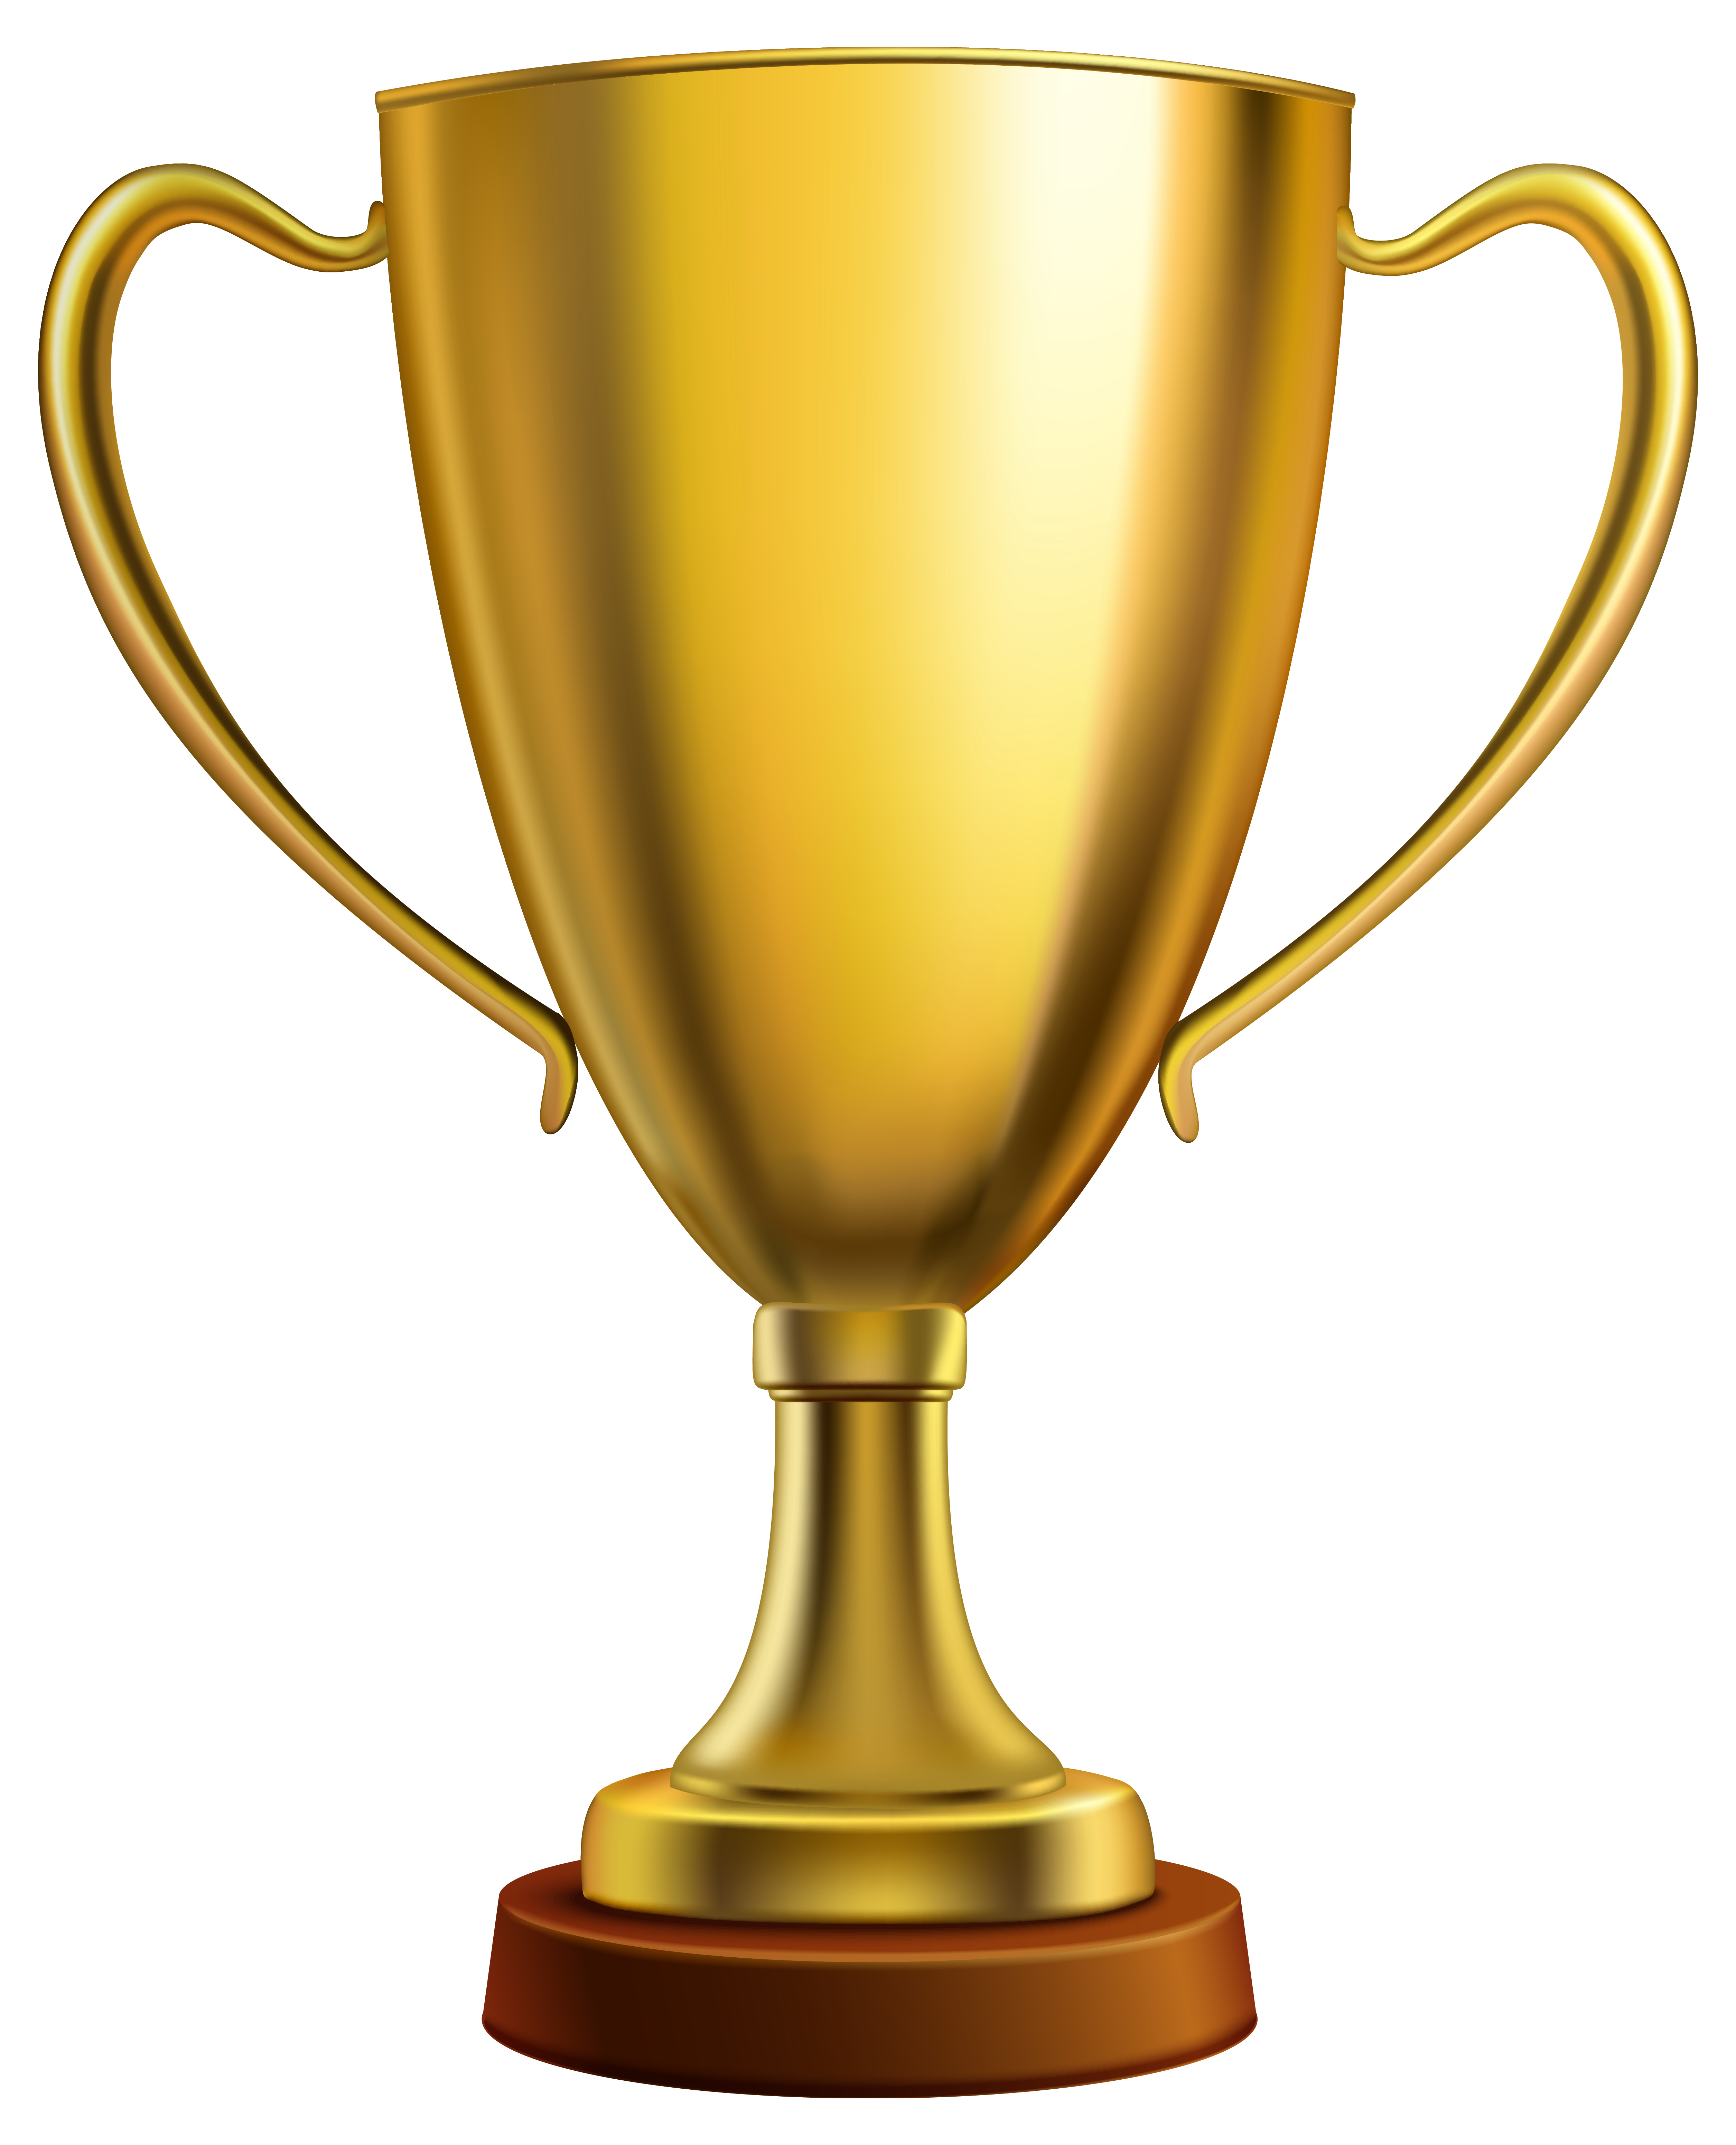 Clipart school trophy. Gold cup png image